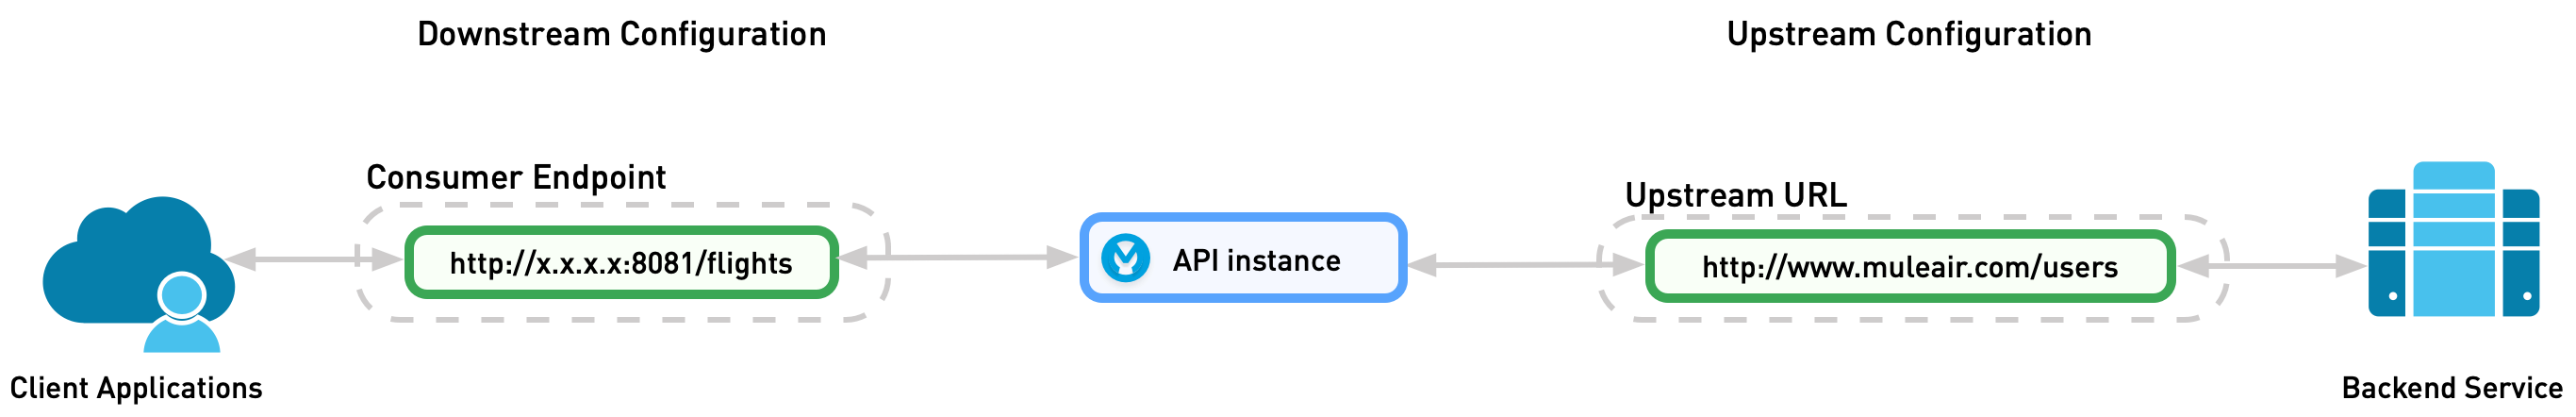 The API instance is deployed on a gateway between the upstream and downstream configuration